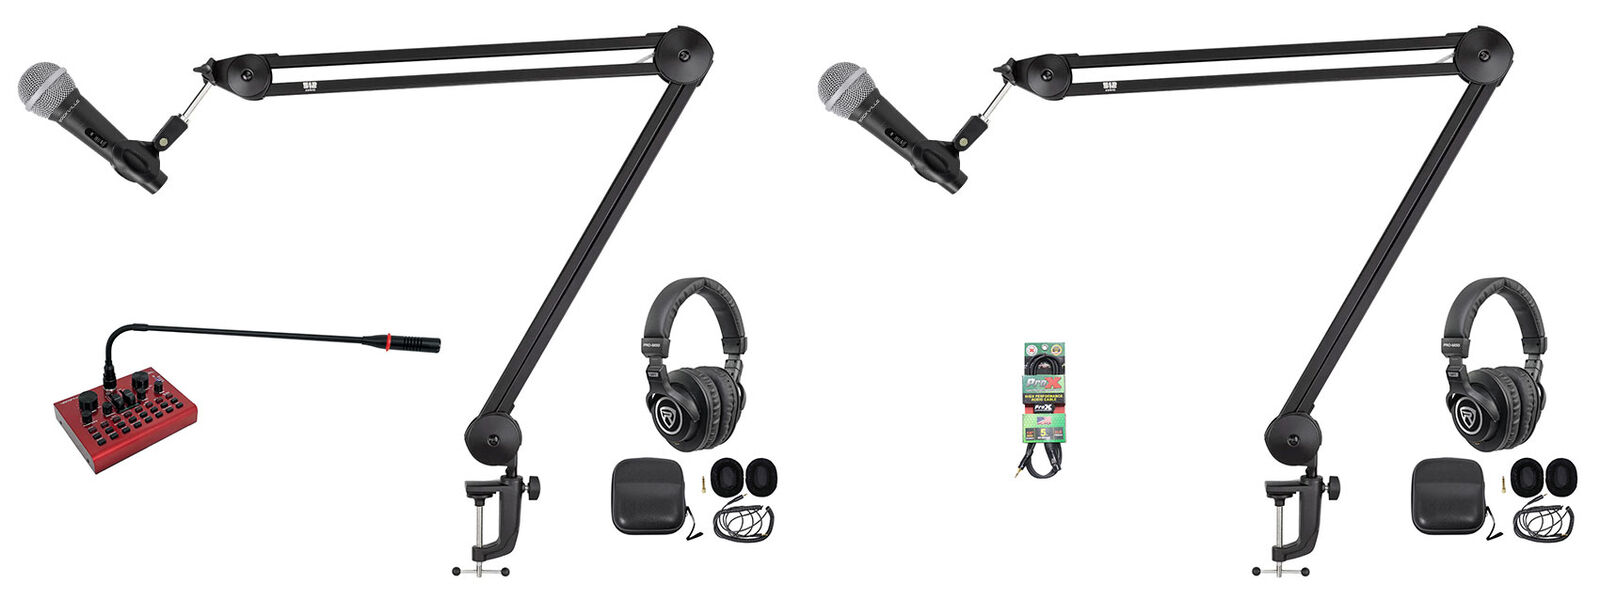 Vocopro 2-Person Podcast Podcasting Recording Streaming Kit+Warm Audio Boom Arms